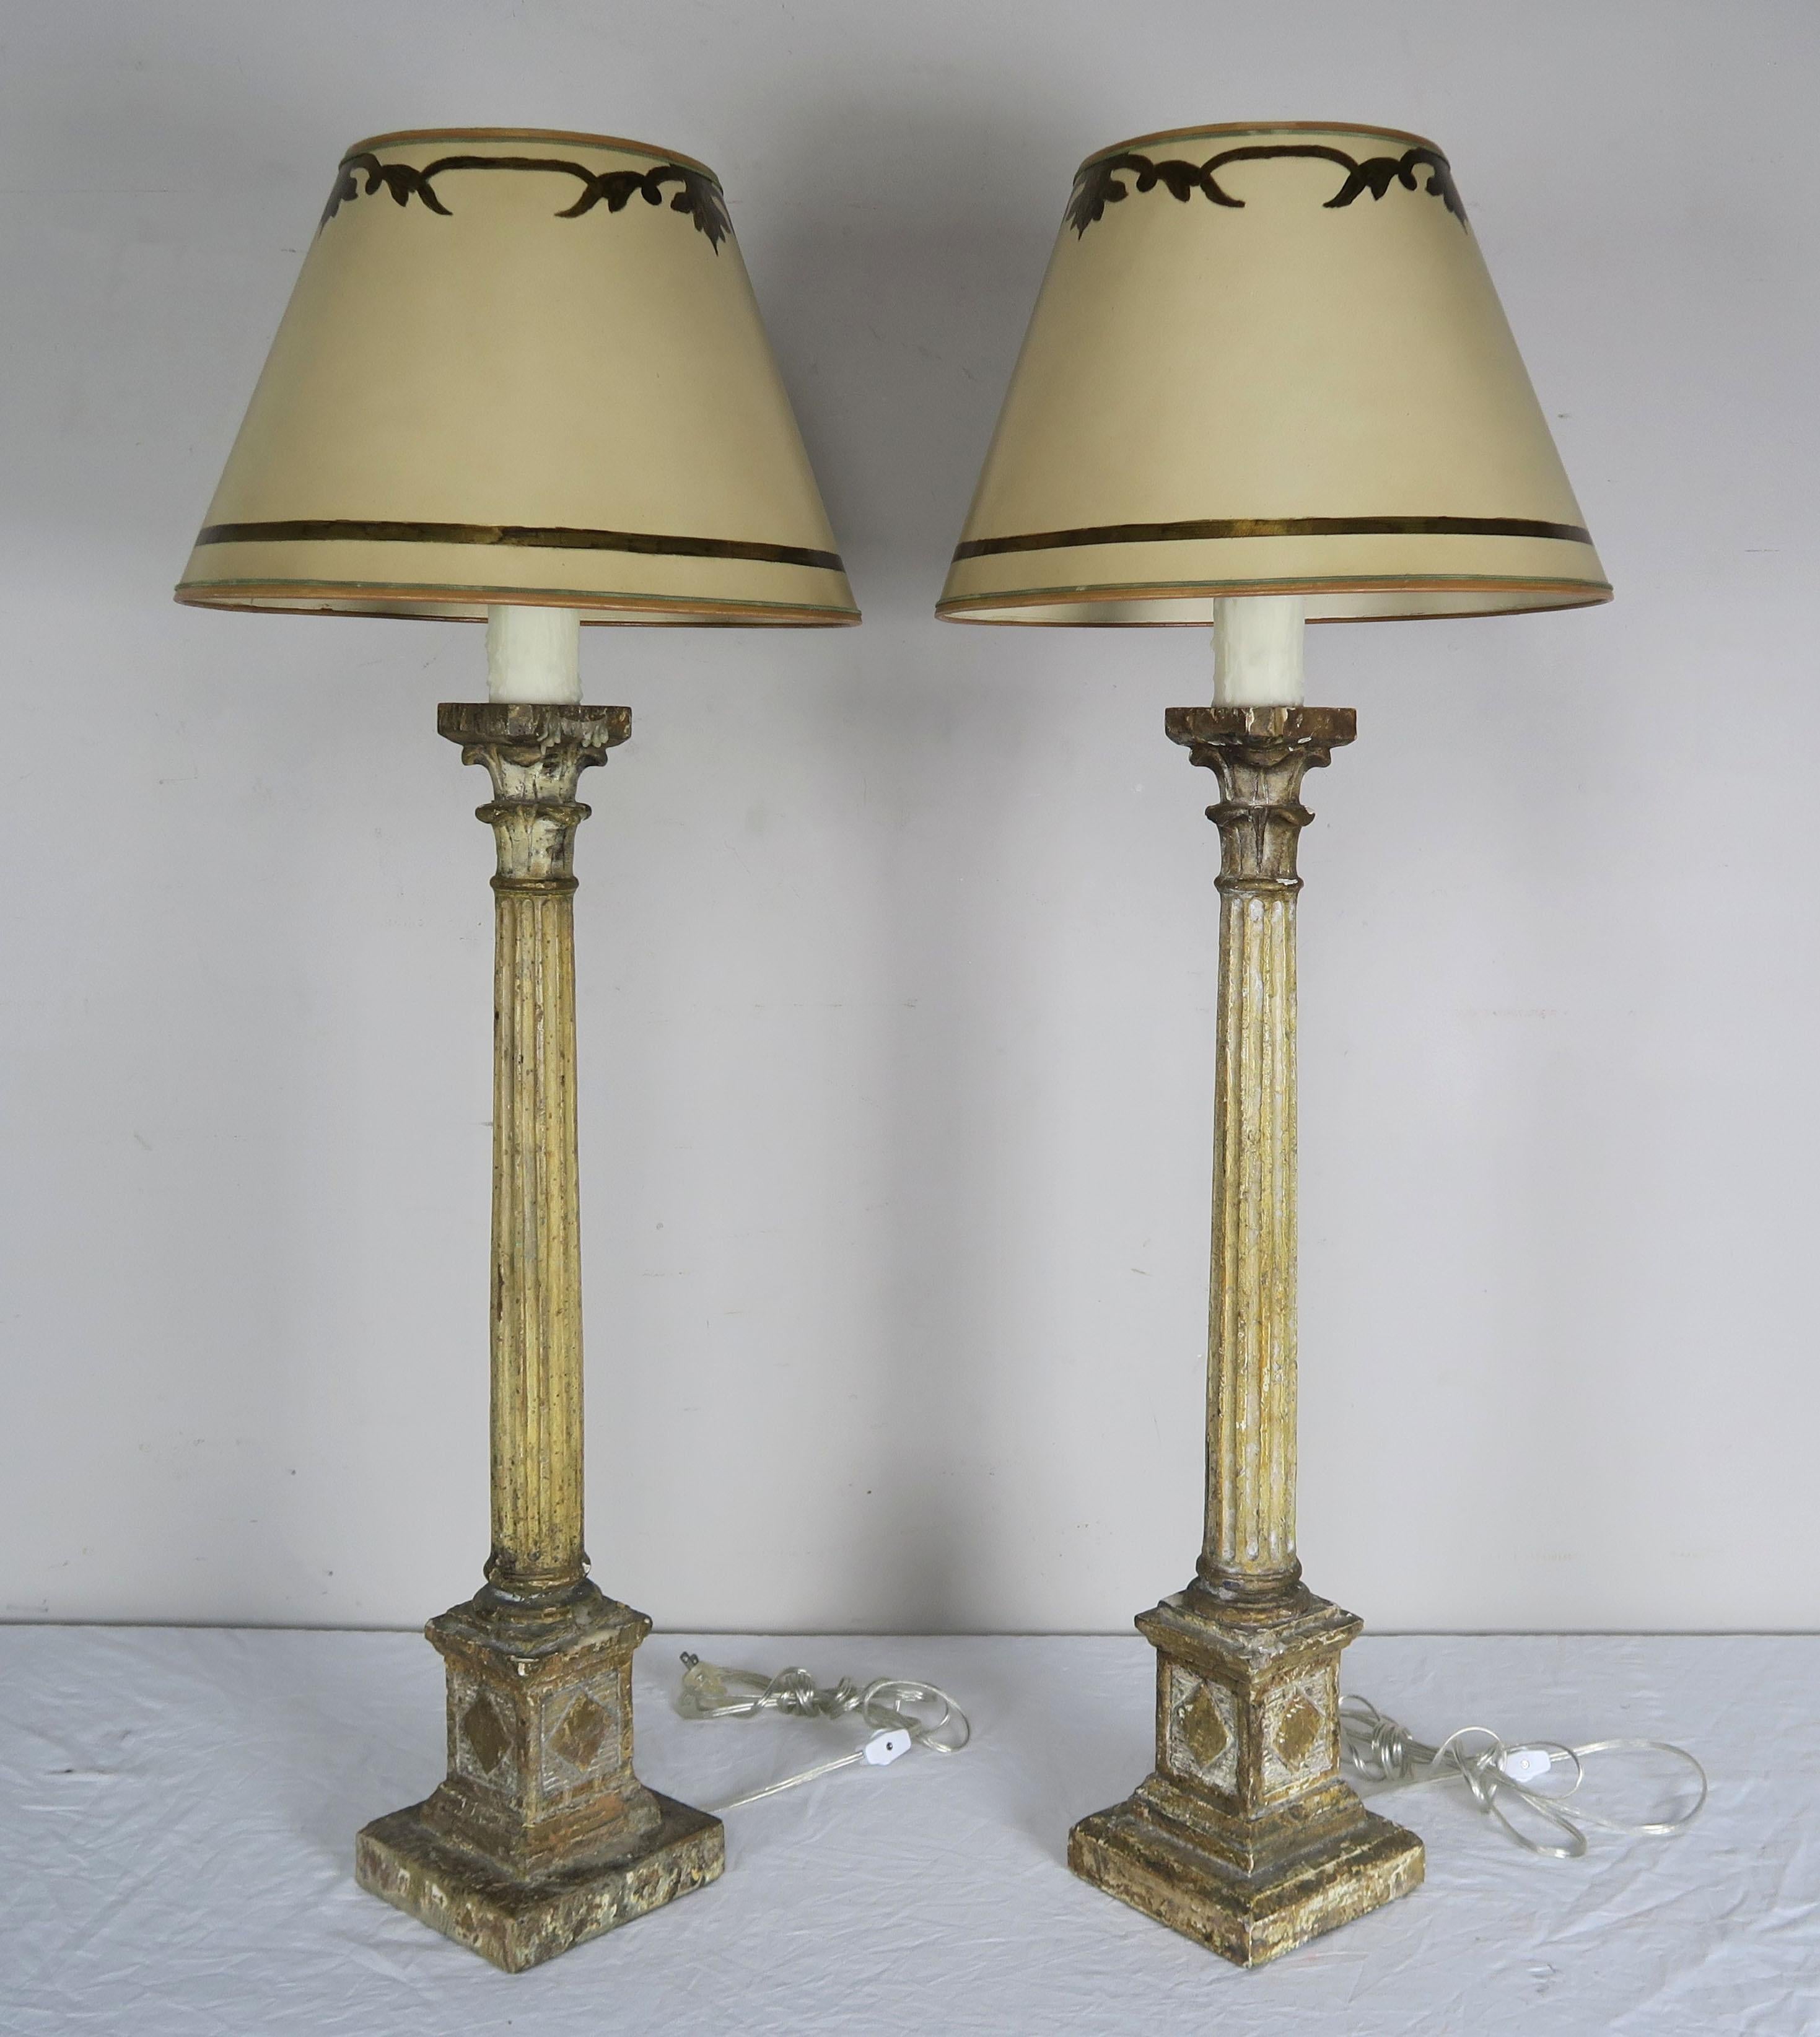 Pair of Italian neoclassical style painted carved wood candlesticks that have been wired into lamps with drip wax candle accent. The lamps are crowned with custom hand painted parchment shades.